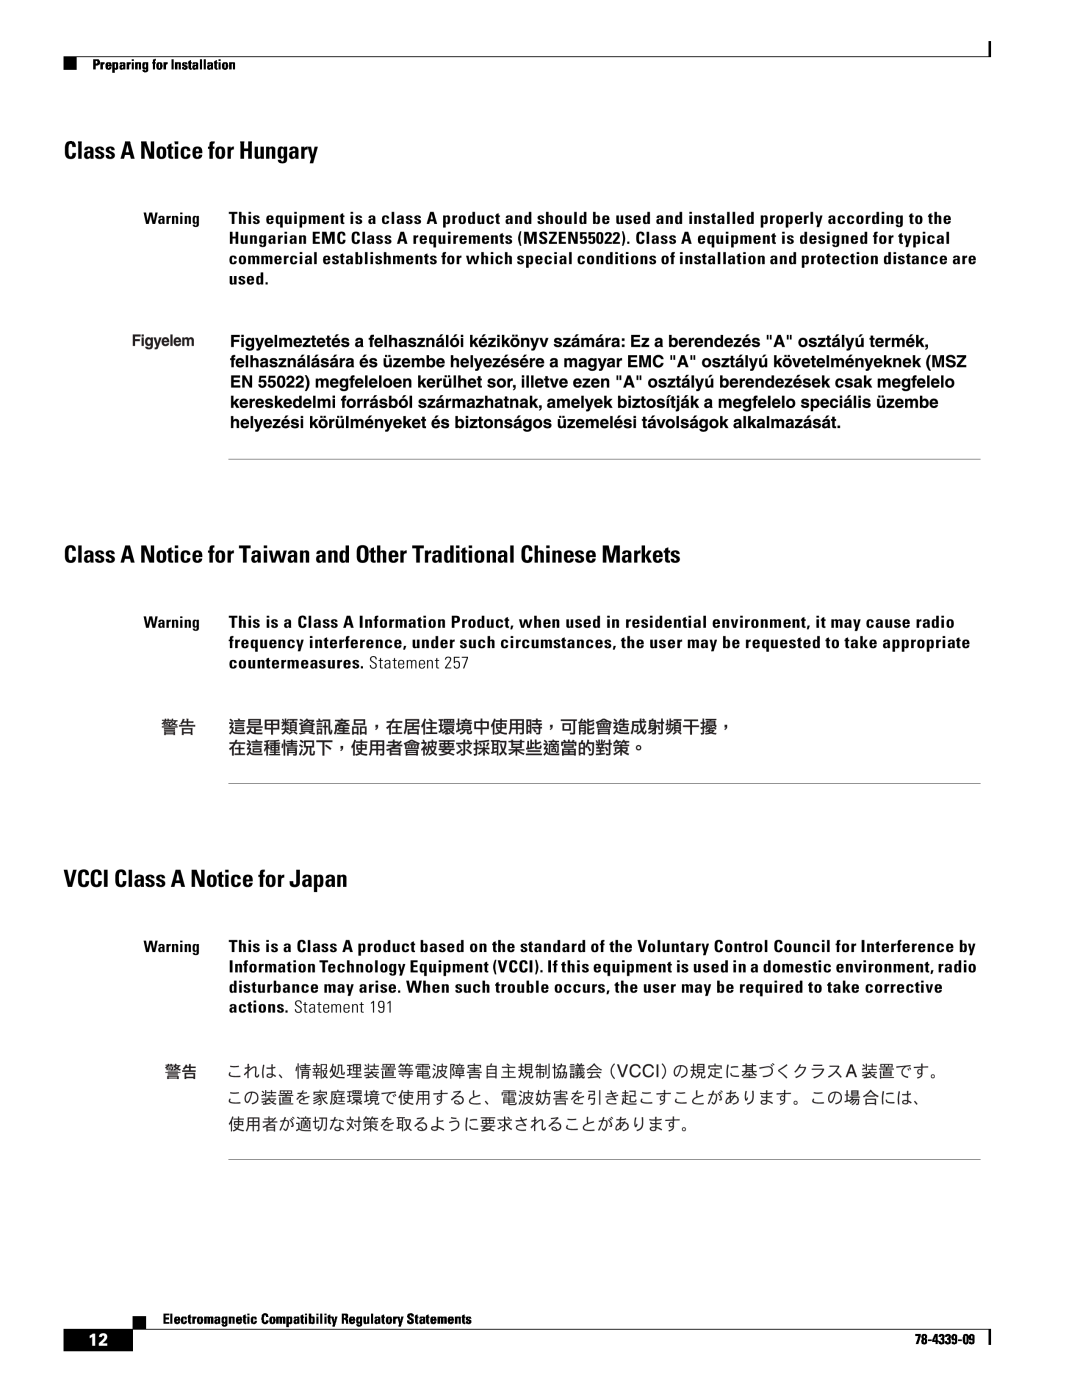 Cisco Systems GRP-B manual Class A Notice for Hungary, Class A Notice for Taiwan and Other Traditional Chinese Markets 